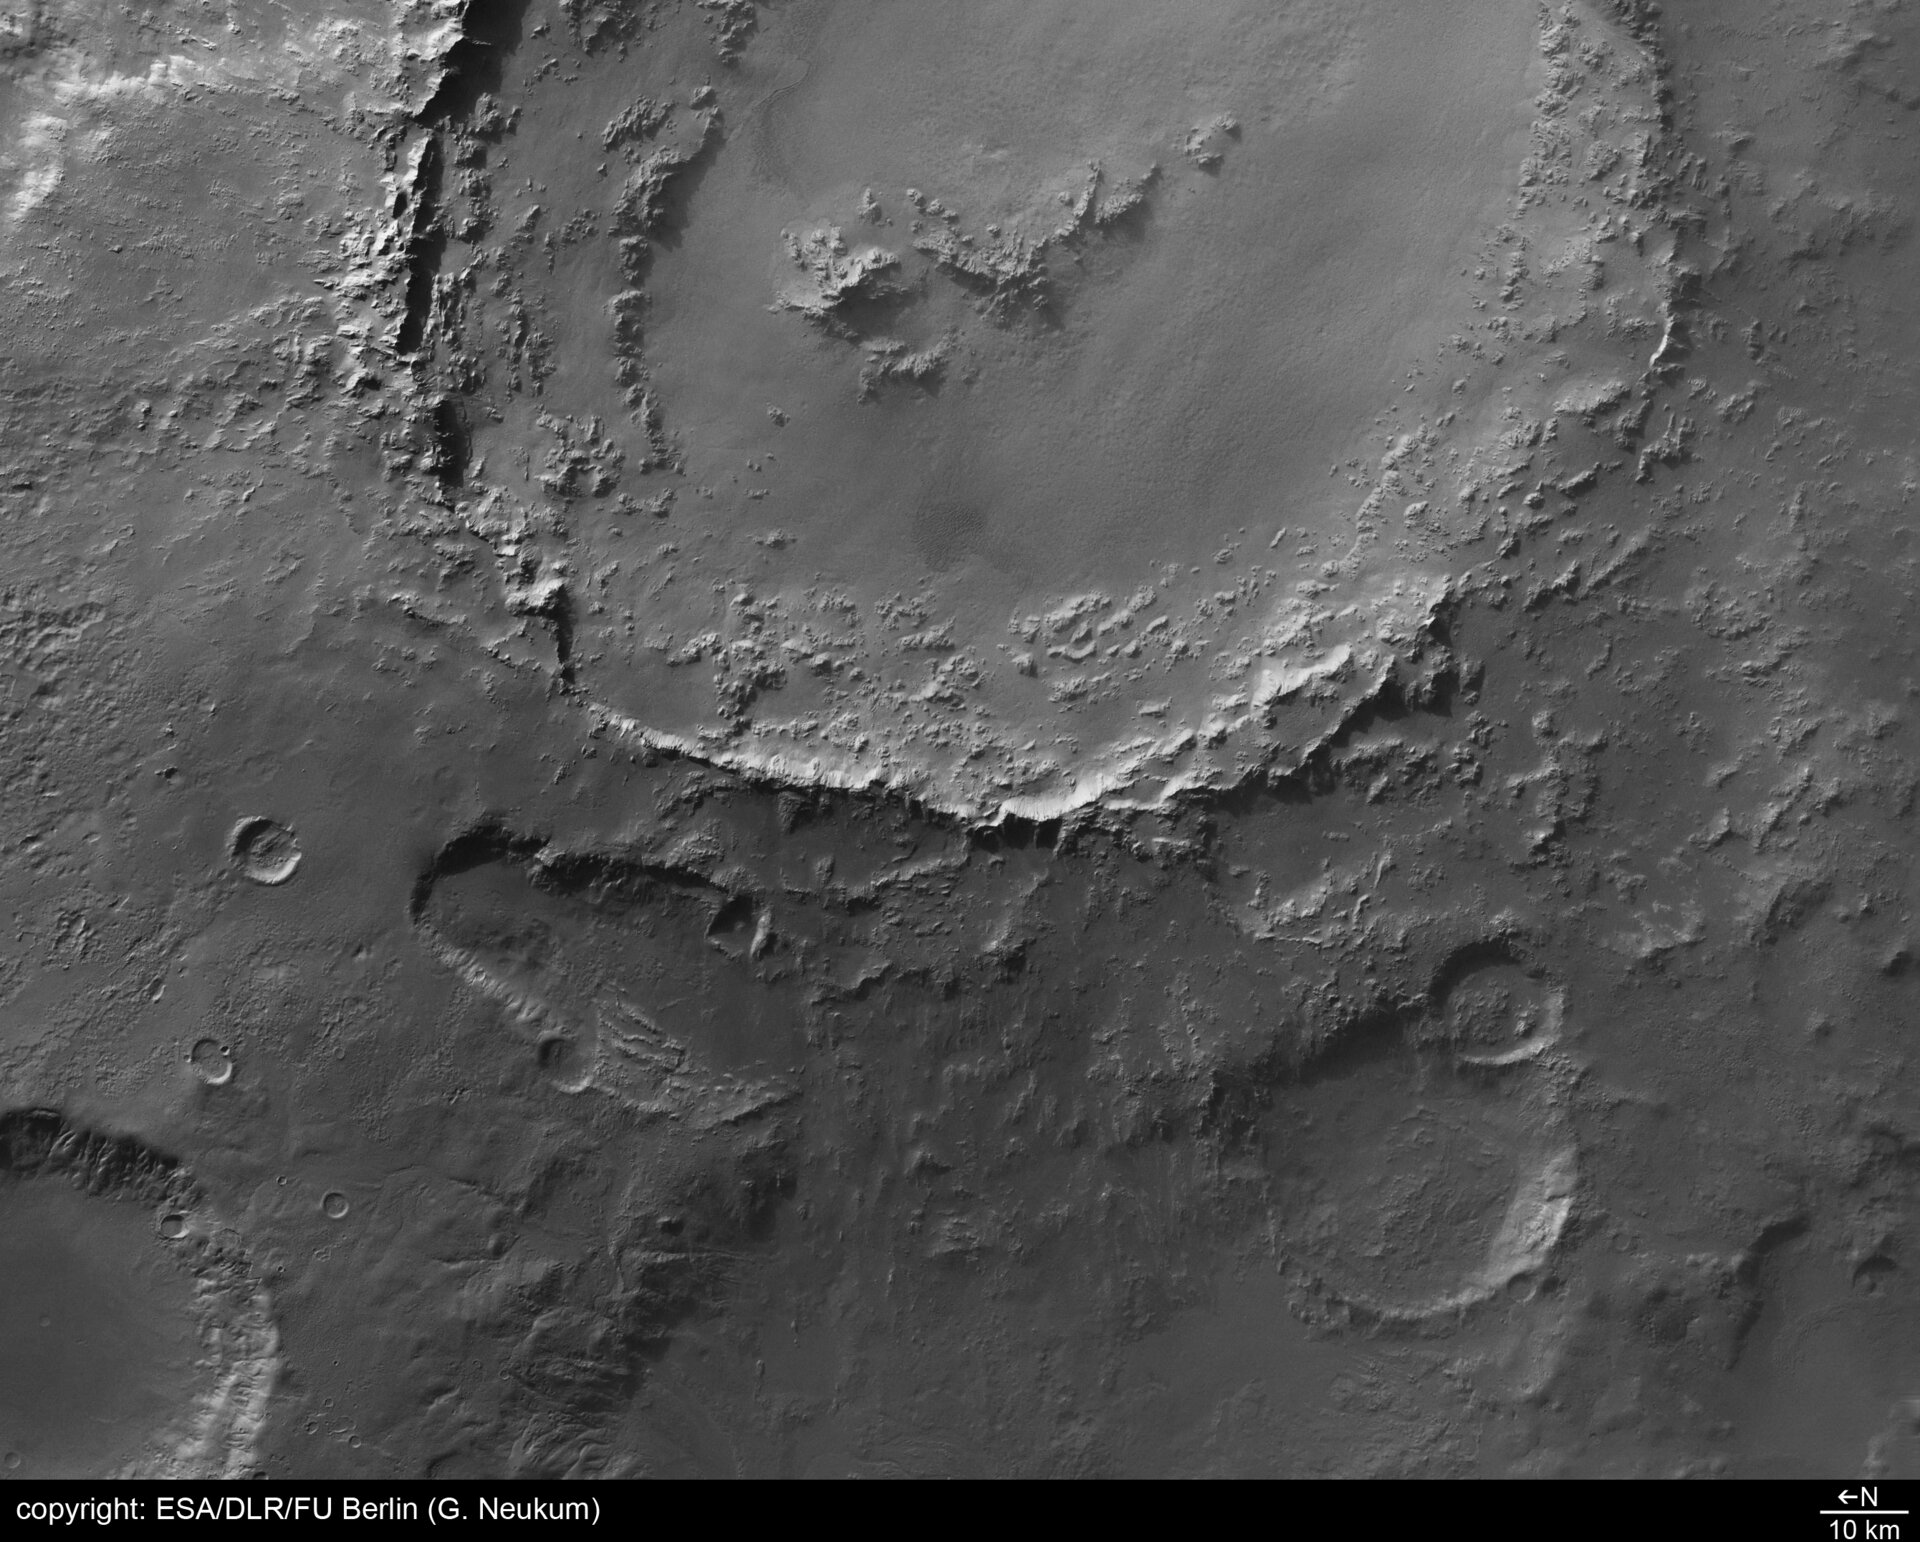 Close-up view of walls of Crater Hale